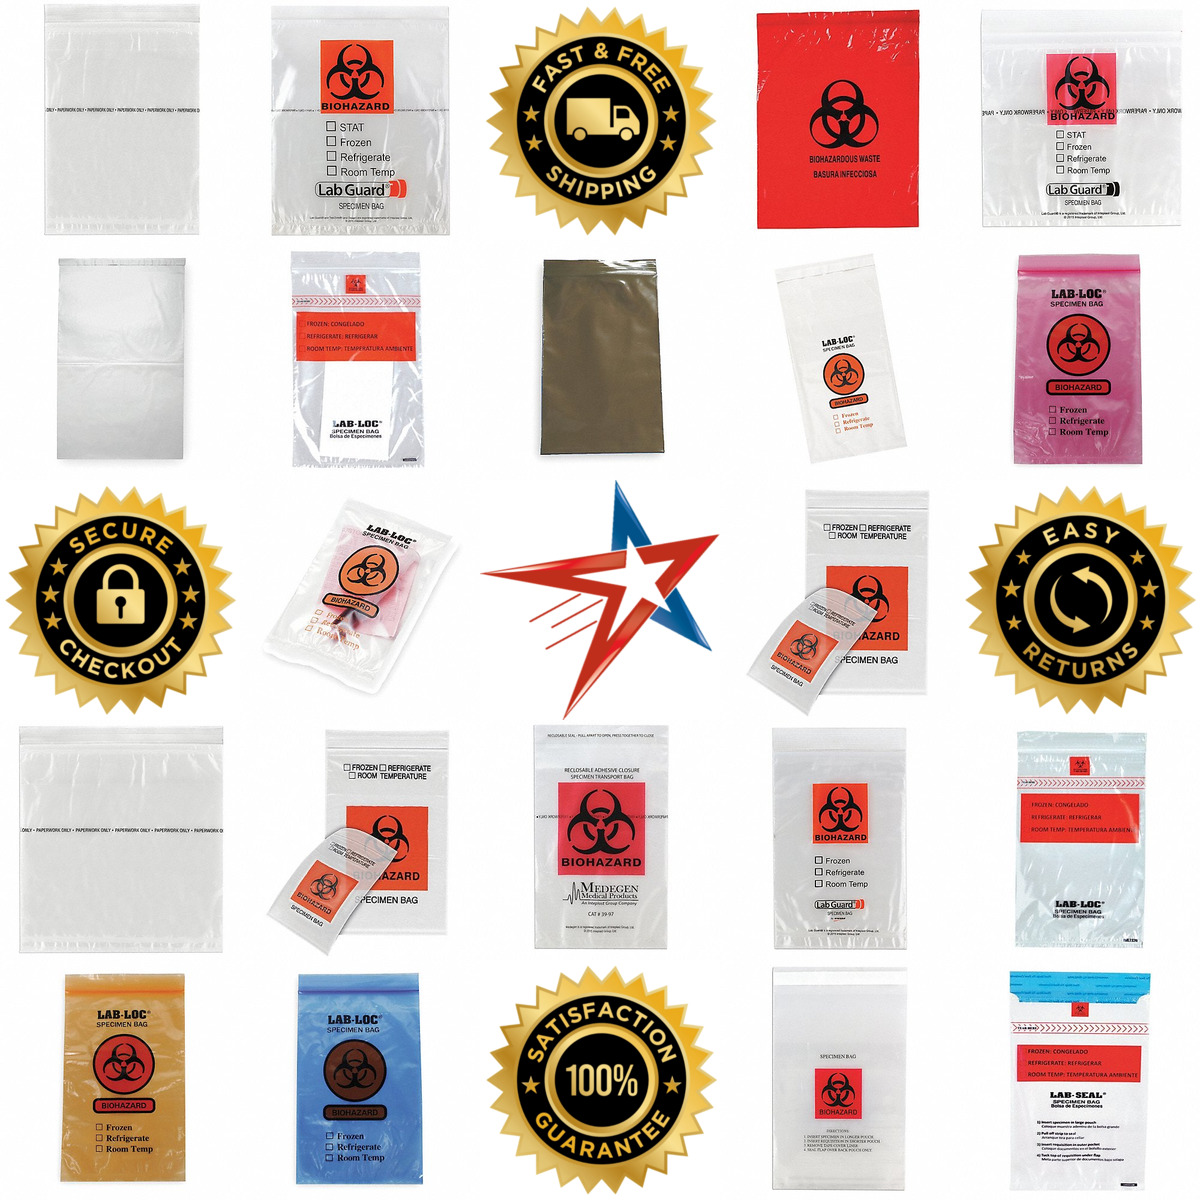 A selection of Specimen Transfer Bags products on GoVets